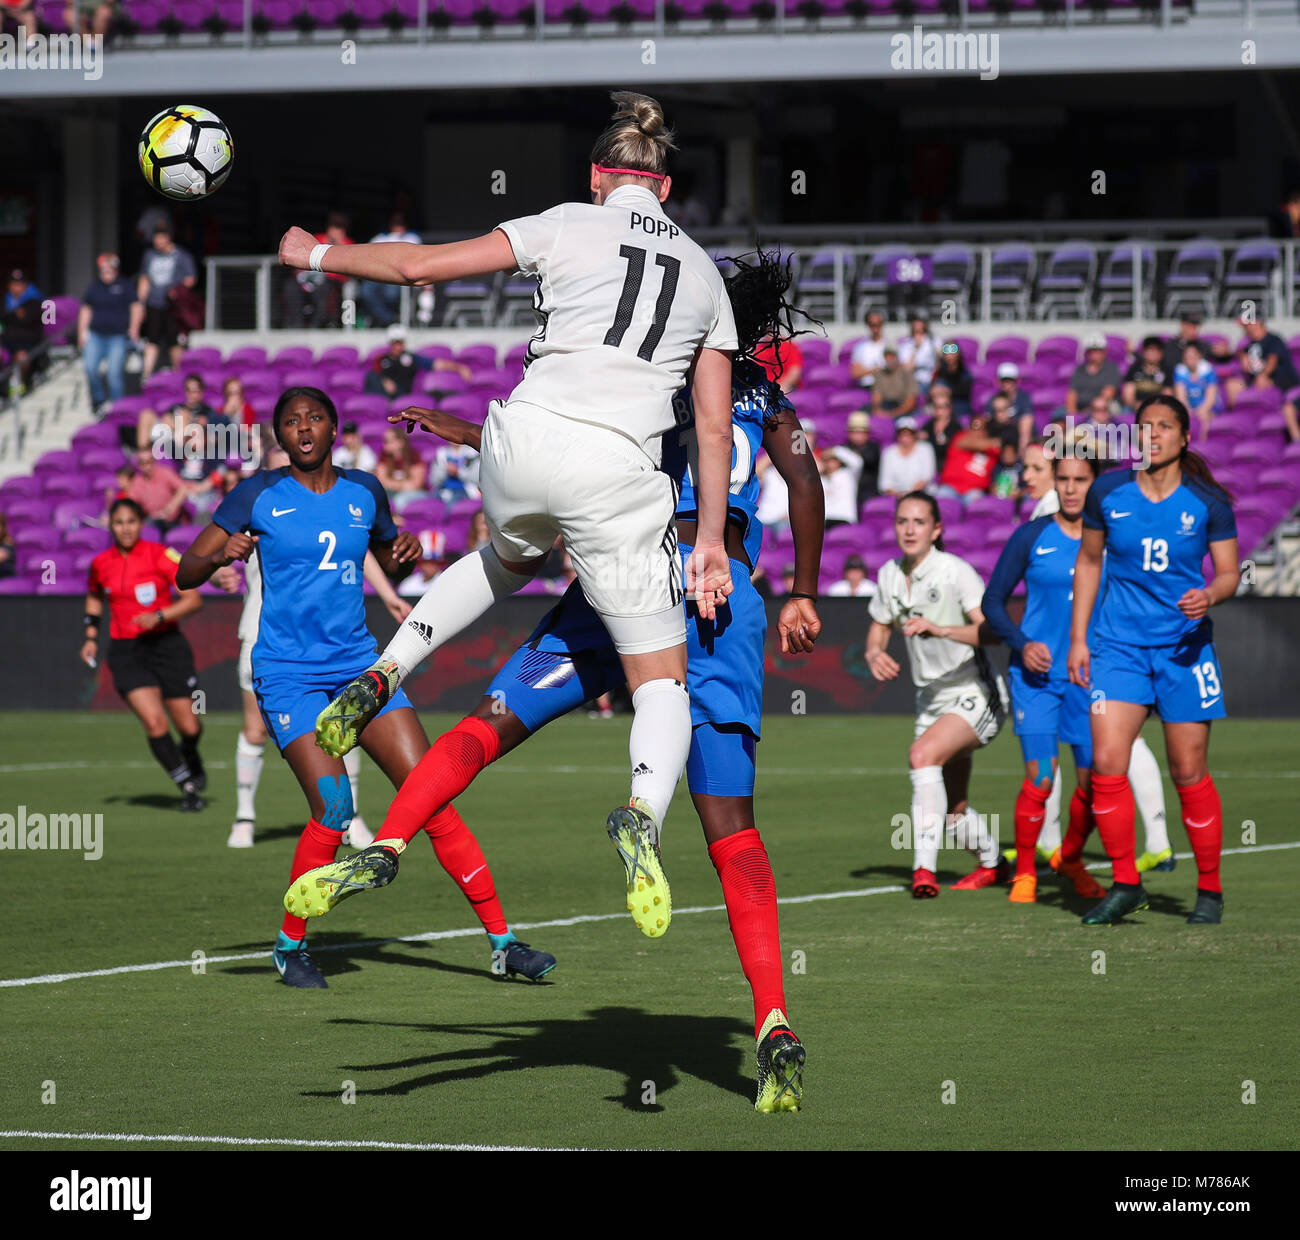 Orlando, Florida, USA. 7th Mar, 2018. Germany forward Alexandra Popp (11) wins a header over France defender Griedge Mbock Bathy (19) during the first half of the SheBelieves Cup women's soccer match between the German Women's National Team and the French Women's National Team at the Orlando City Stadium in Orlando, Florida. Credit: Mario Houben/ZUMA Wire/Alamy Live News Stock Photo